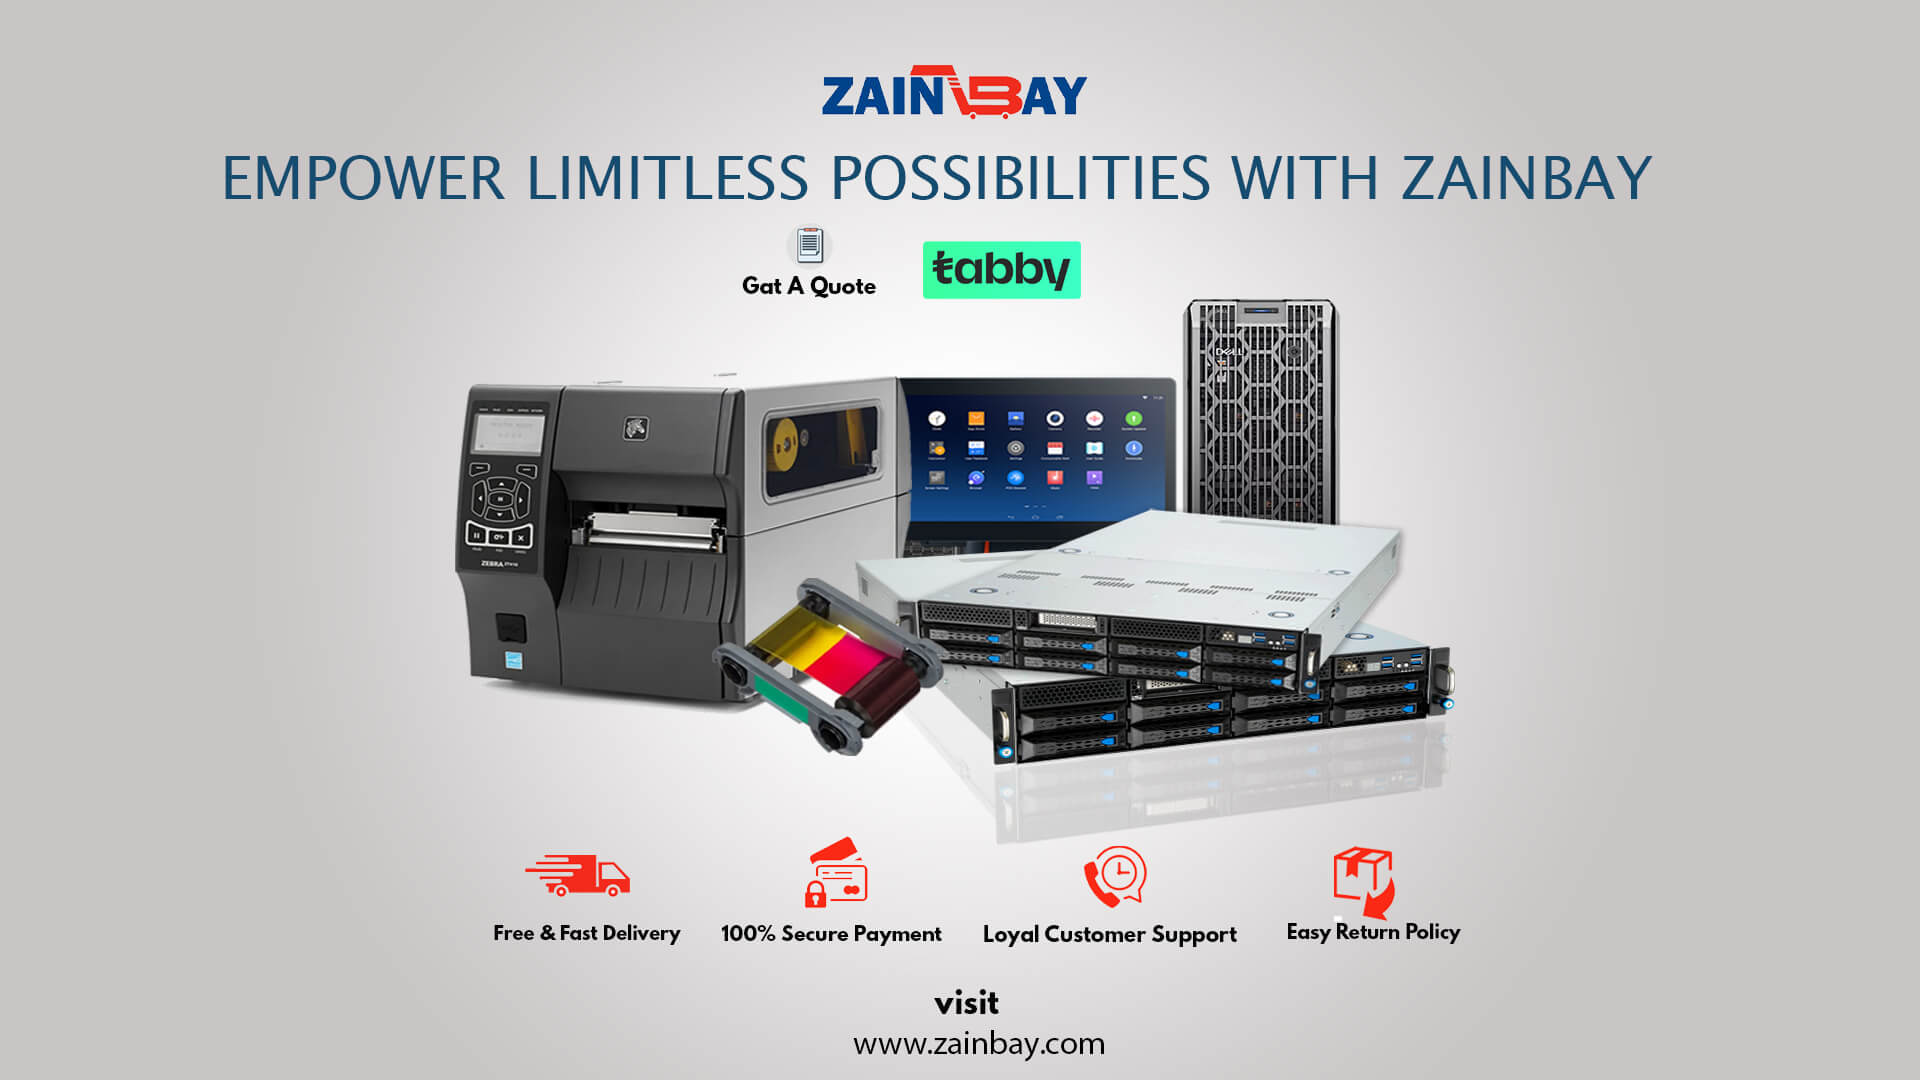 Empower Limitless Possibilities with Zainbay